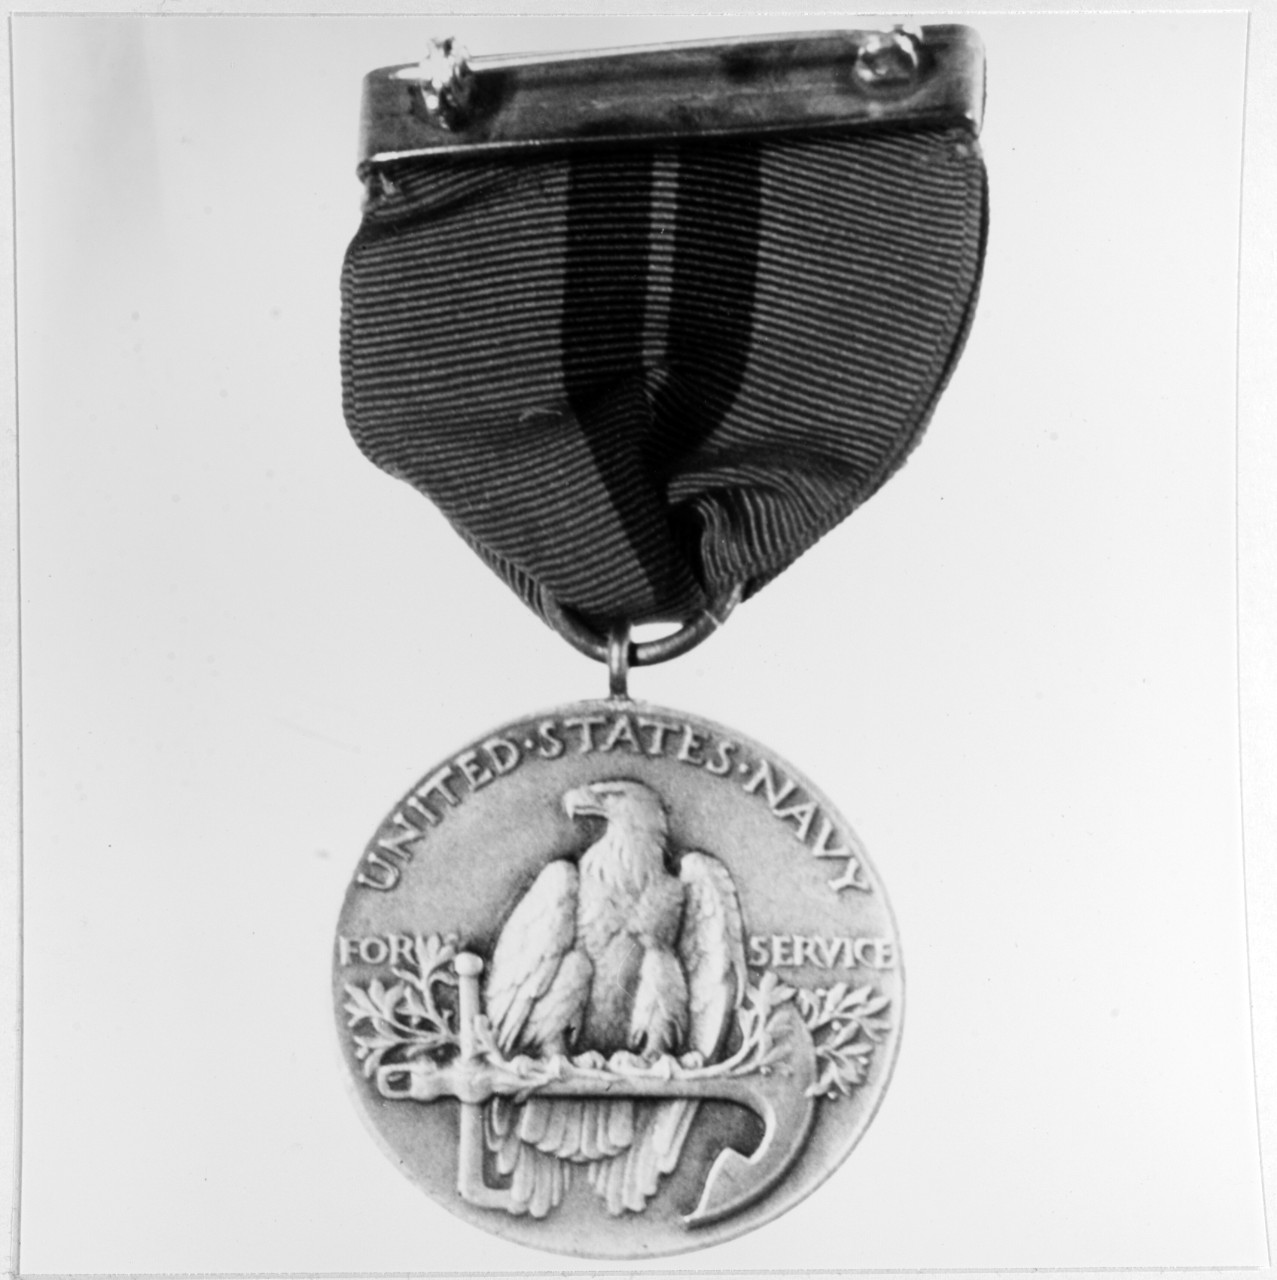 1916 Dominican Campaign Medal